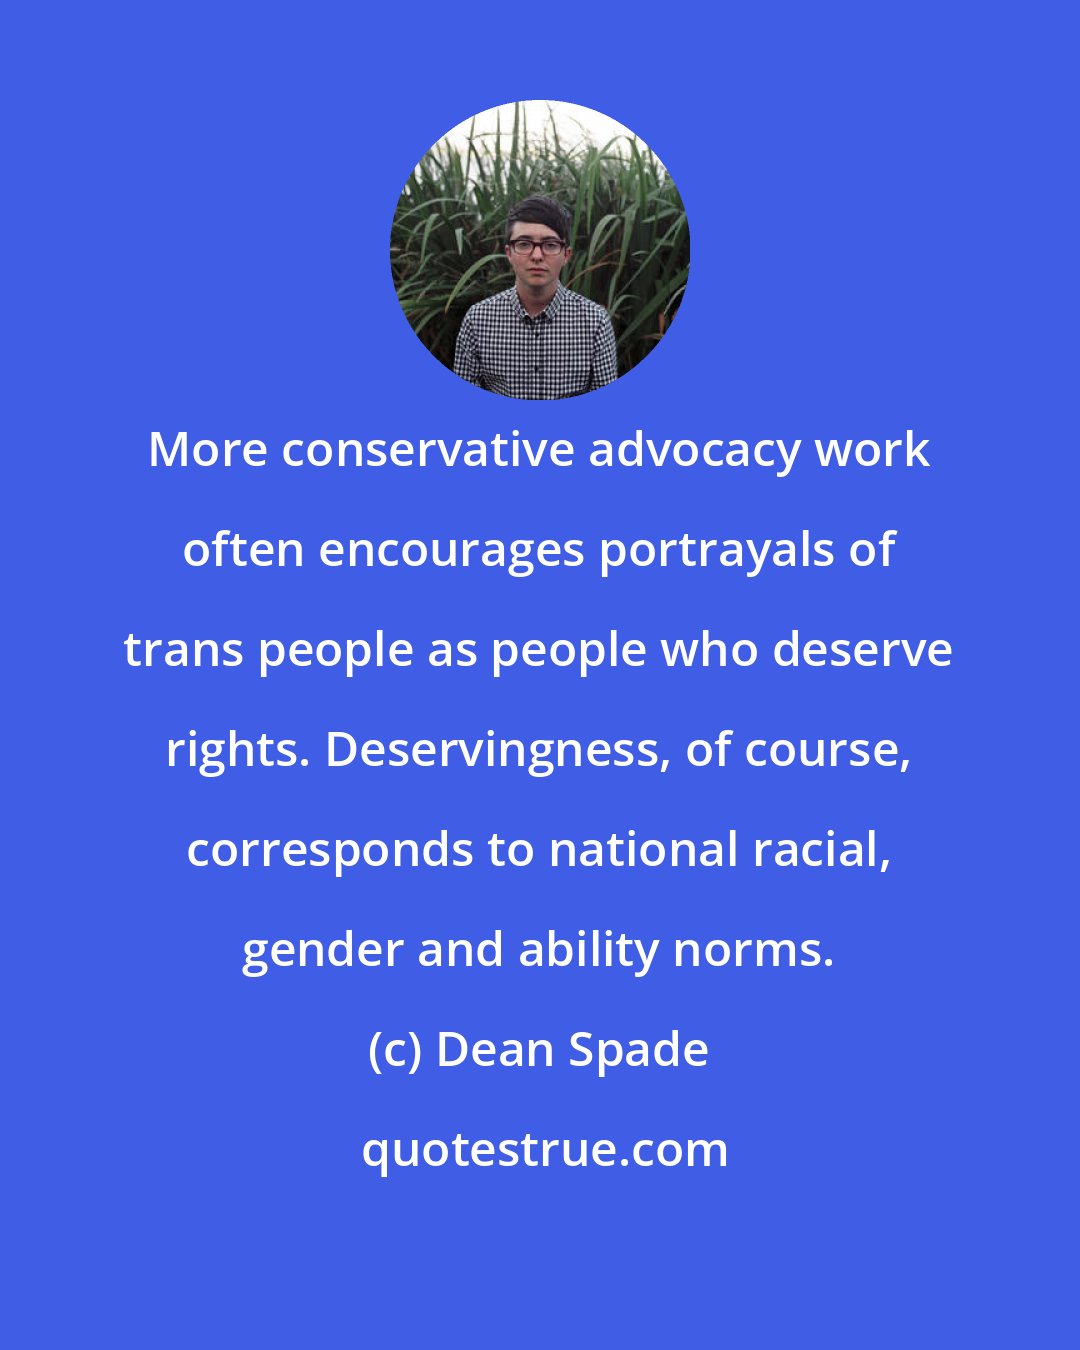 Dean Spade: More conservative advocacy work often encourages portrayals of trans people as people who deserve rights. Deservingness, of course, corresponds to national racial, gender and ability norms.